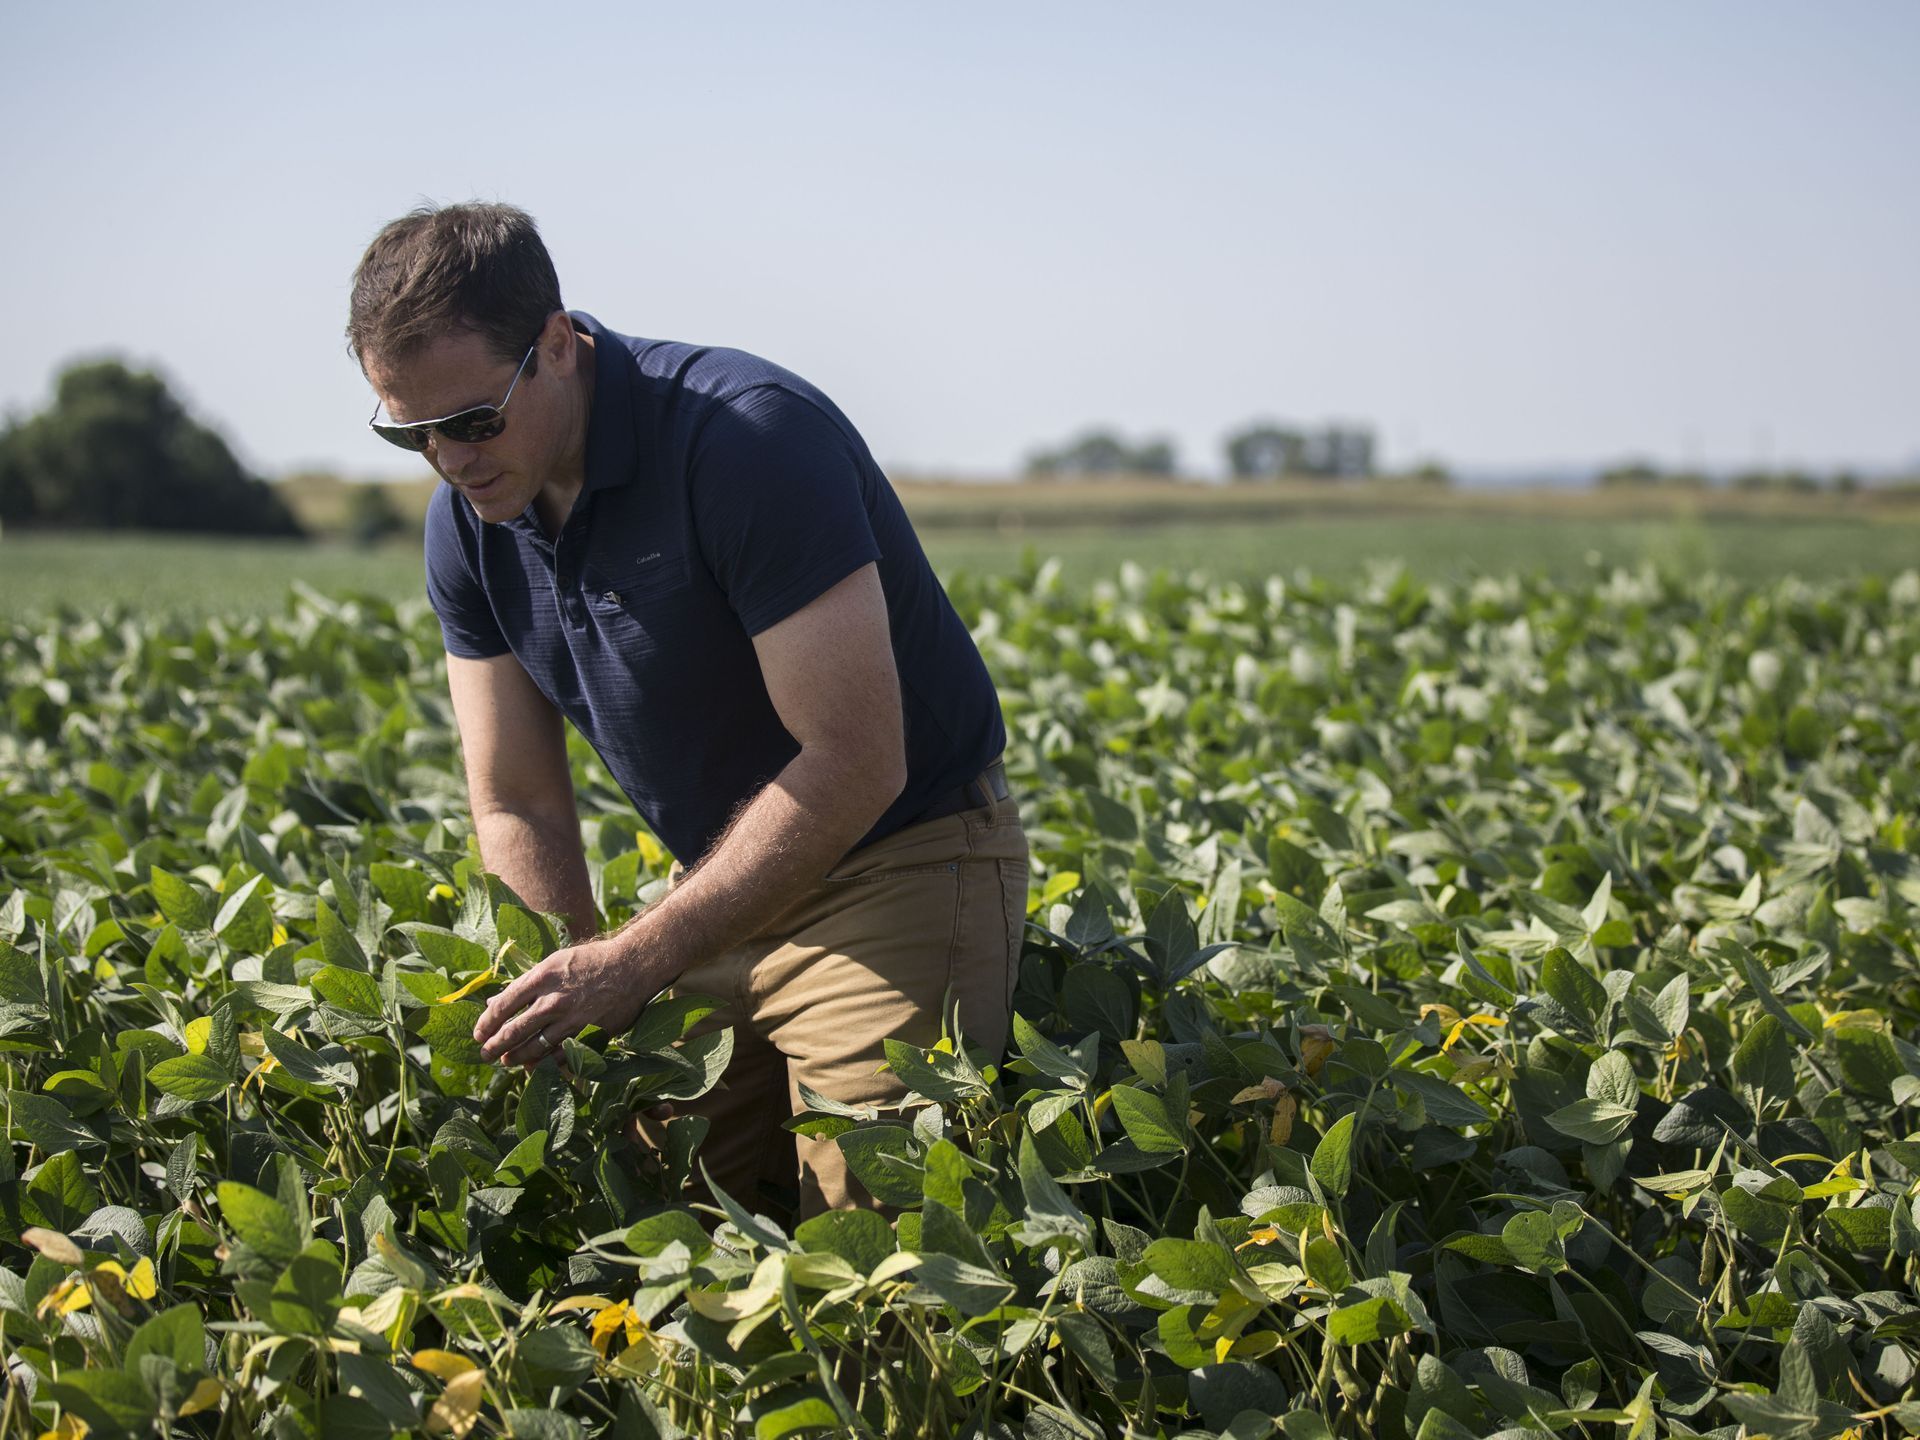 Grant Kimberley, a sixth germination family farmer and Market Development Director for the Iowa Soybean Association, checks soybeans on his family's farm, Tuesday, Sept. 5, 2017, in rural Polk County. Image by Kelsey Kremer.